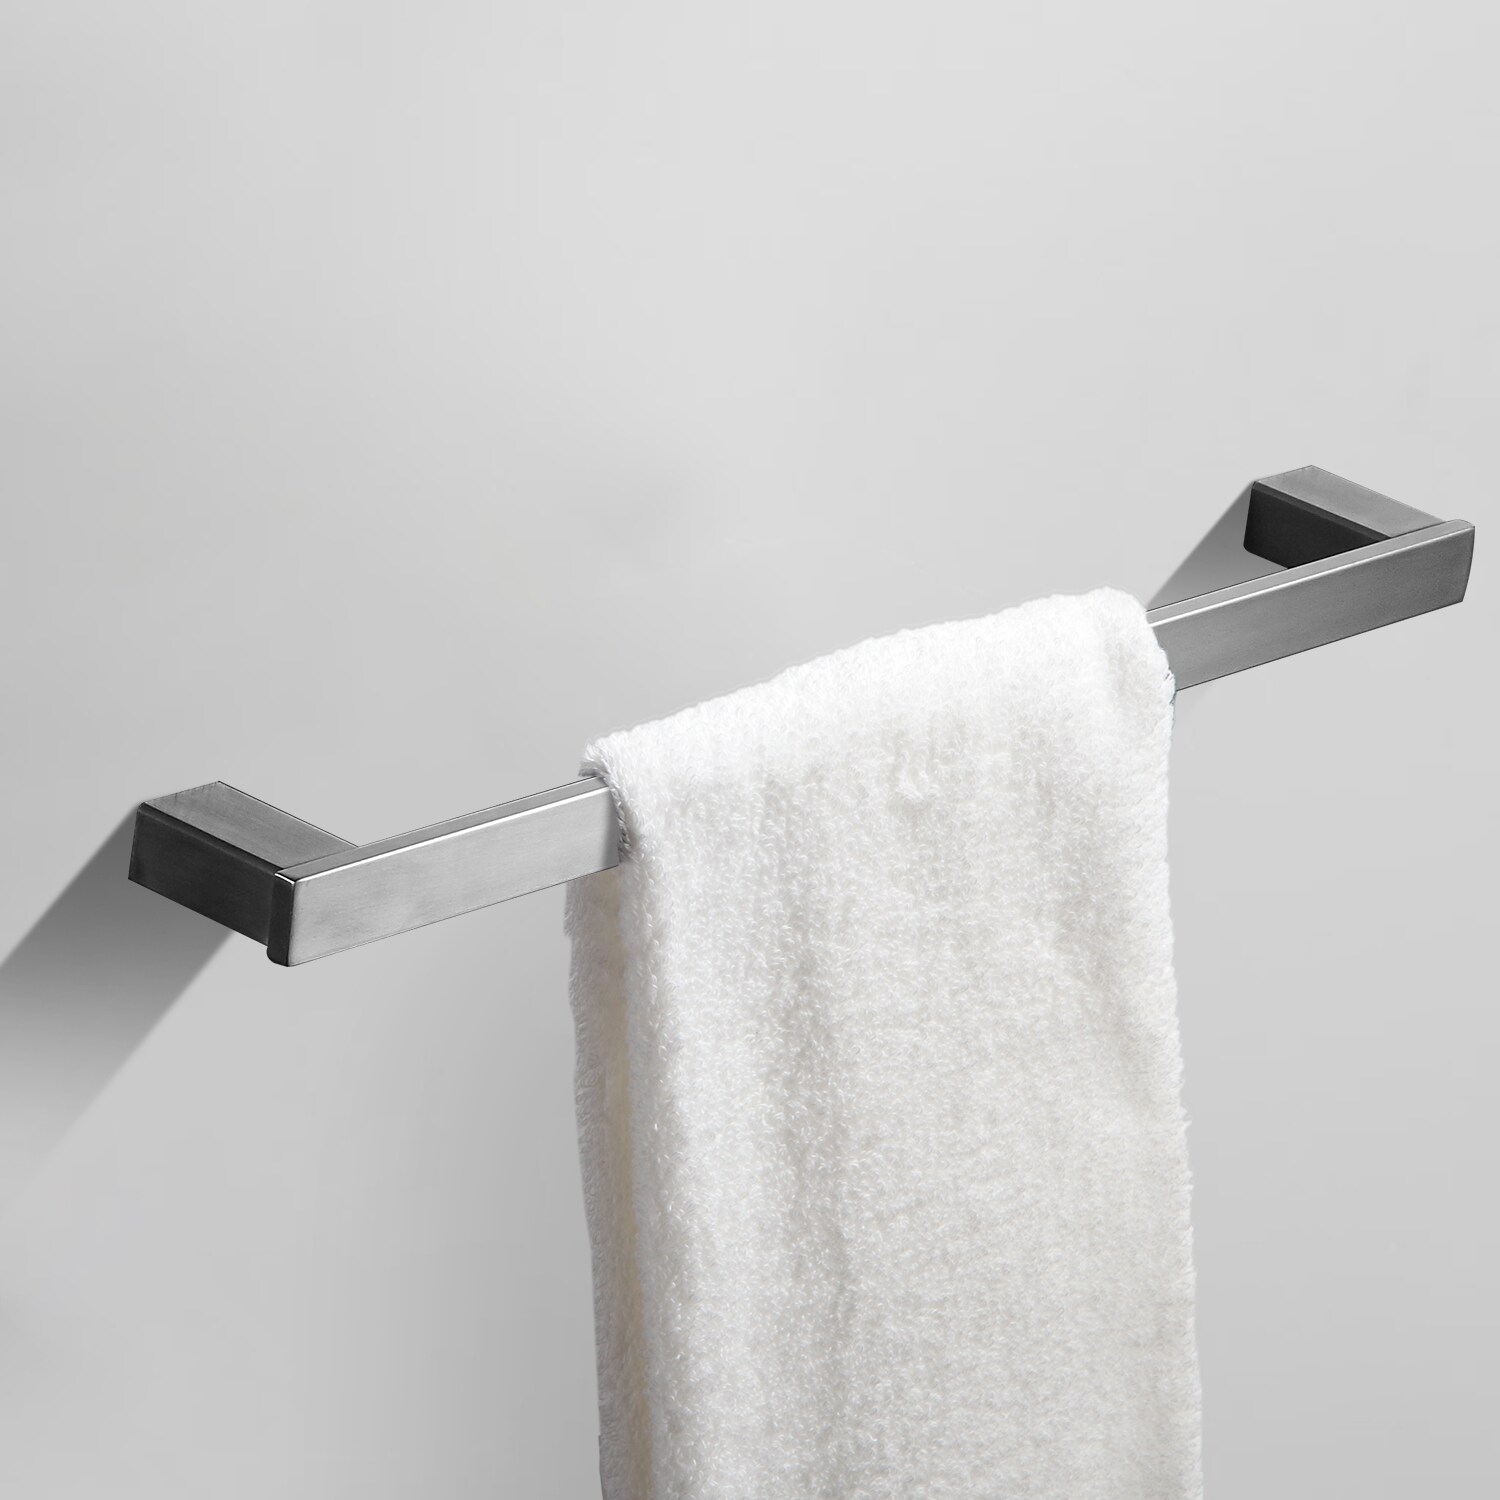 50cm Multilayer Wall-mounted Bathroom Stainless steel Towel rack 40cm FJXLZ® Towel rack 60cm Wall-mounted stainless steel Size : 40cm 